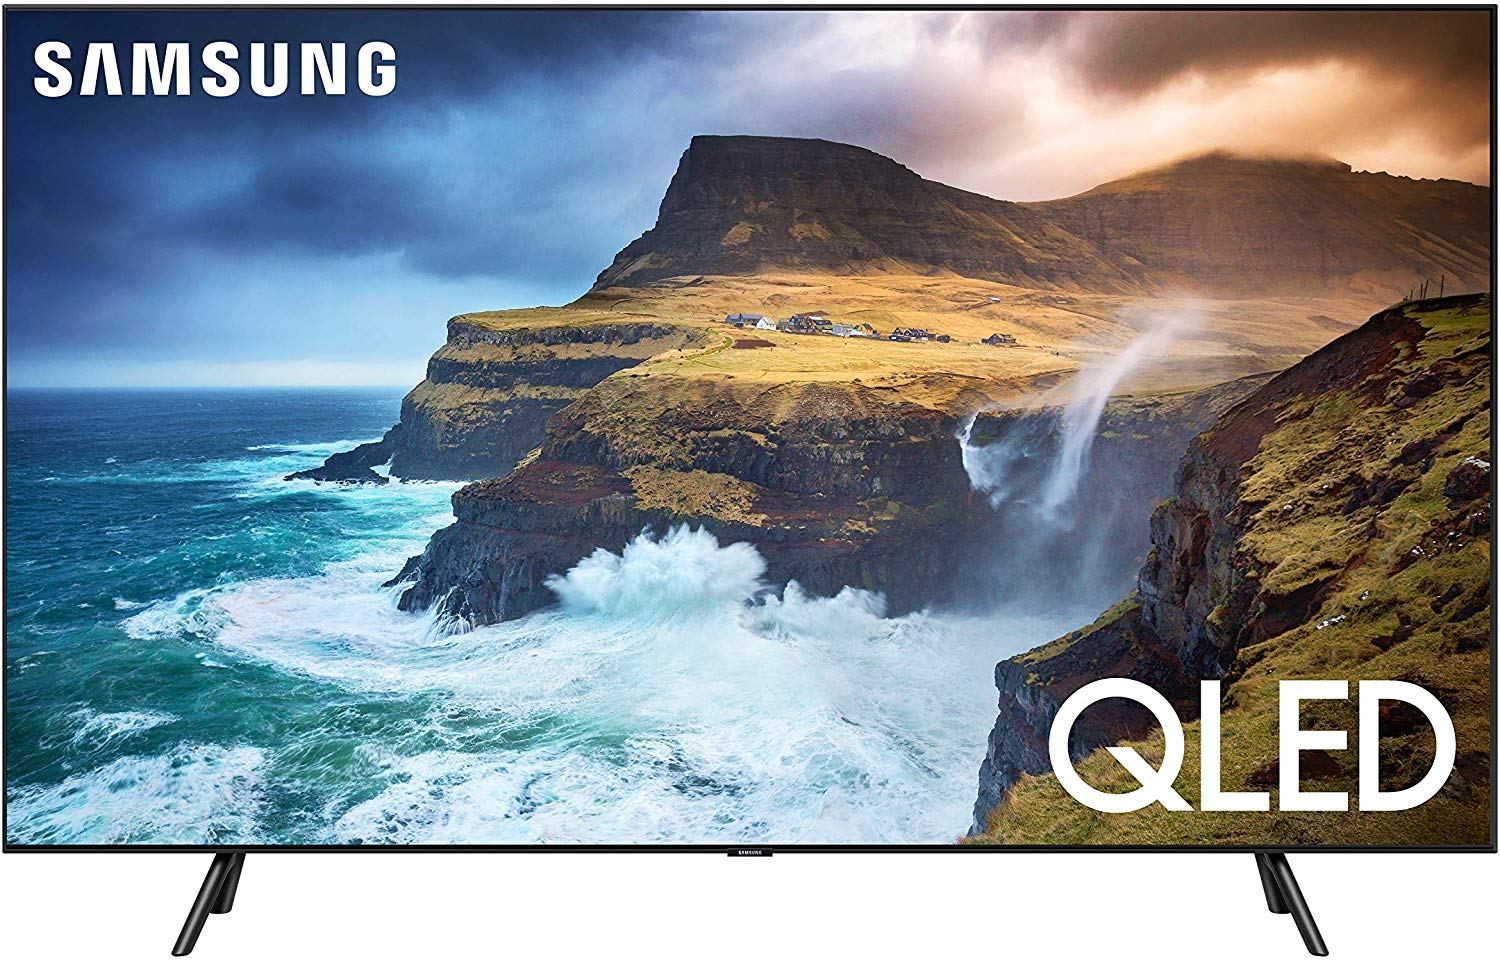 Samsung's utmost luxurious TV has a 2,500 discount at Walmart for